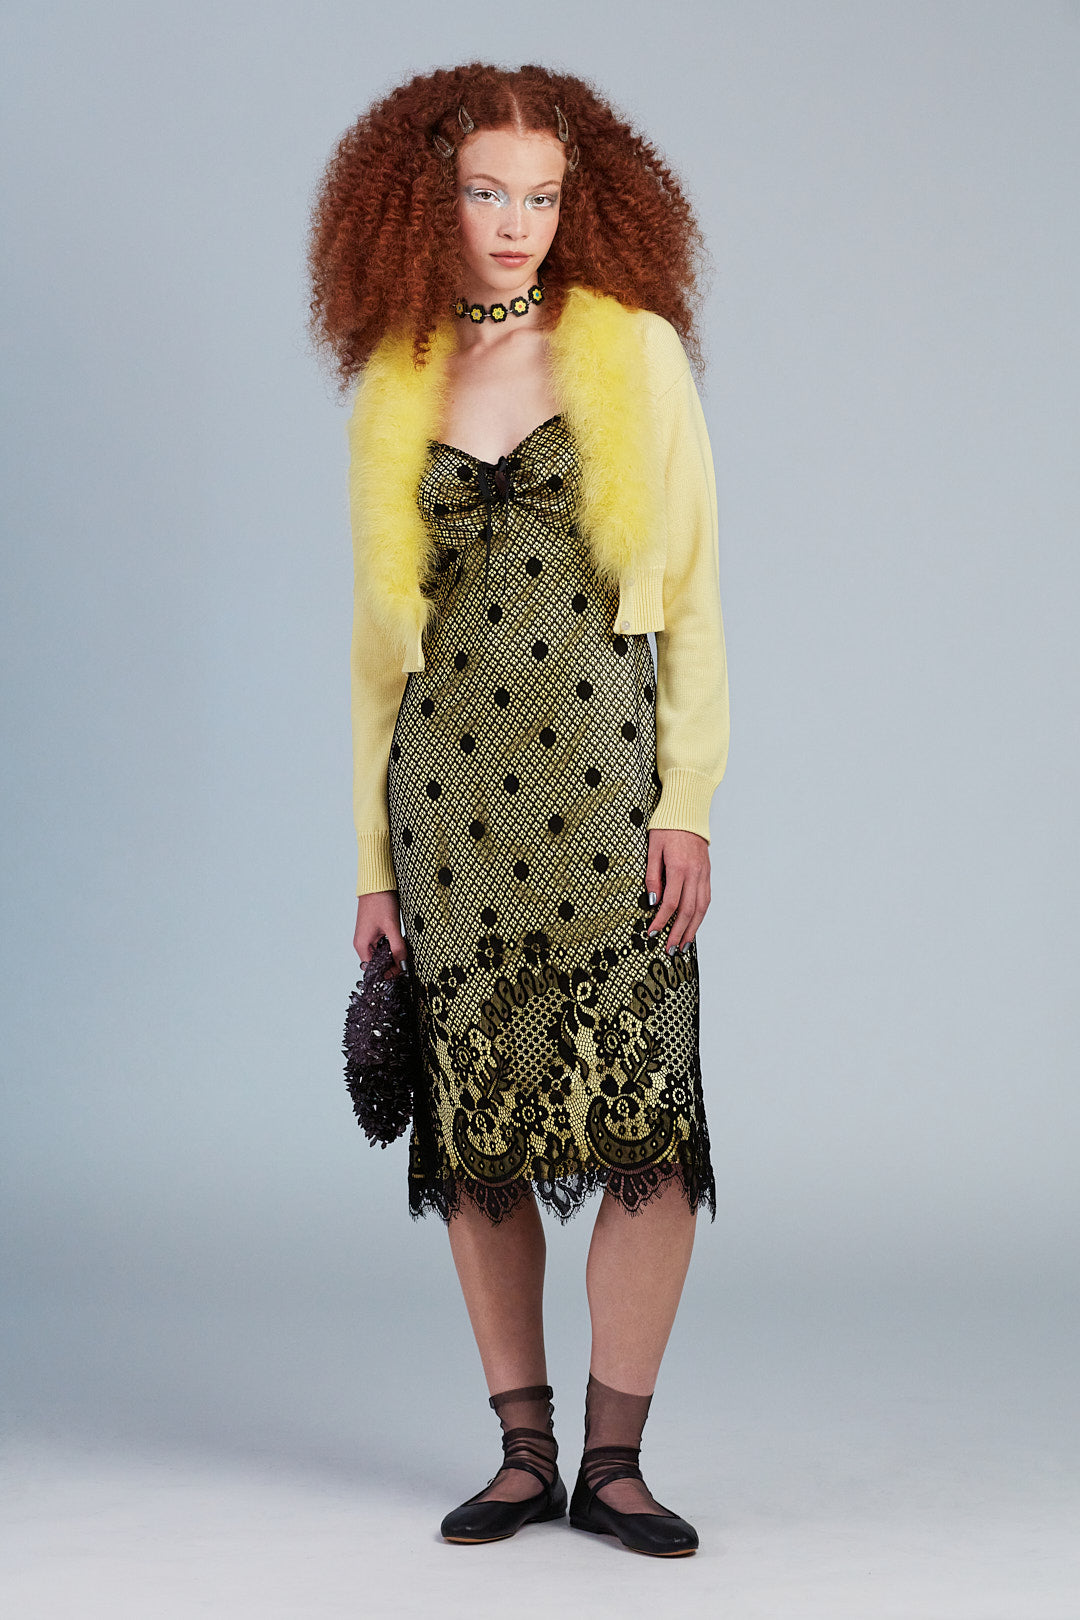 Washed Satin with Lace Dress Canary Yellow under and  Black lace on top of it, floral at bottom